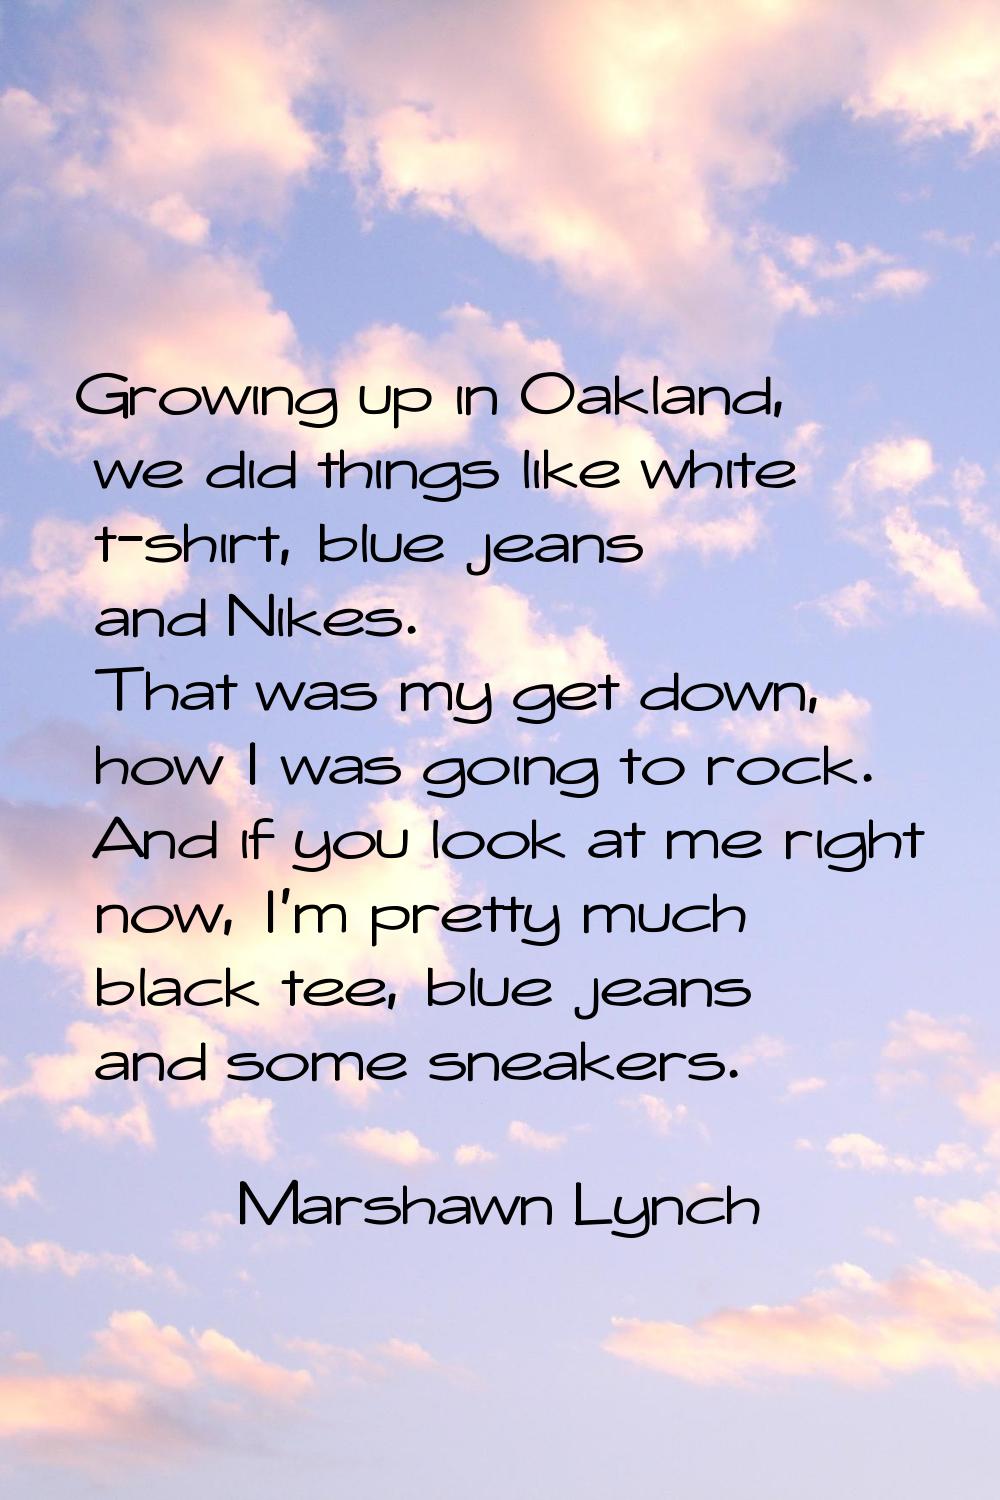 Growing up in Oakland, we did things like white t-shirt, blue jeans and Nikes. That was my get down